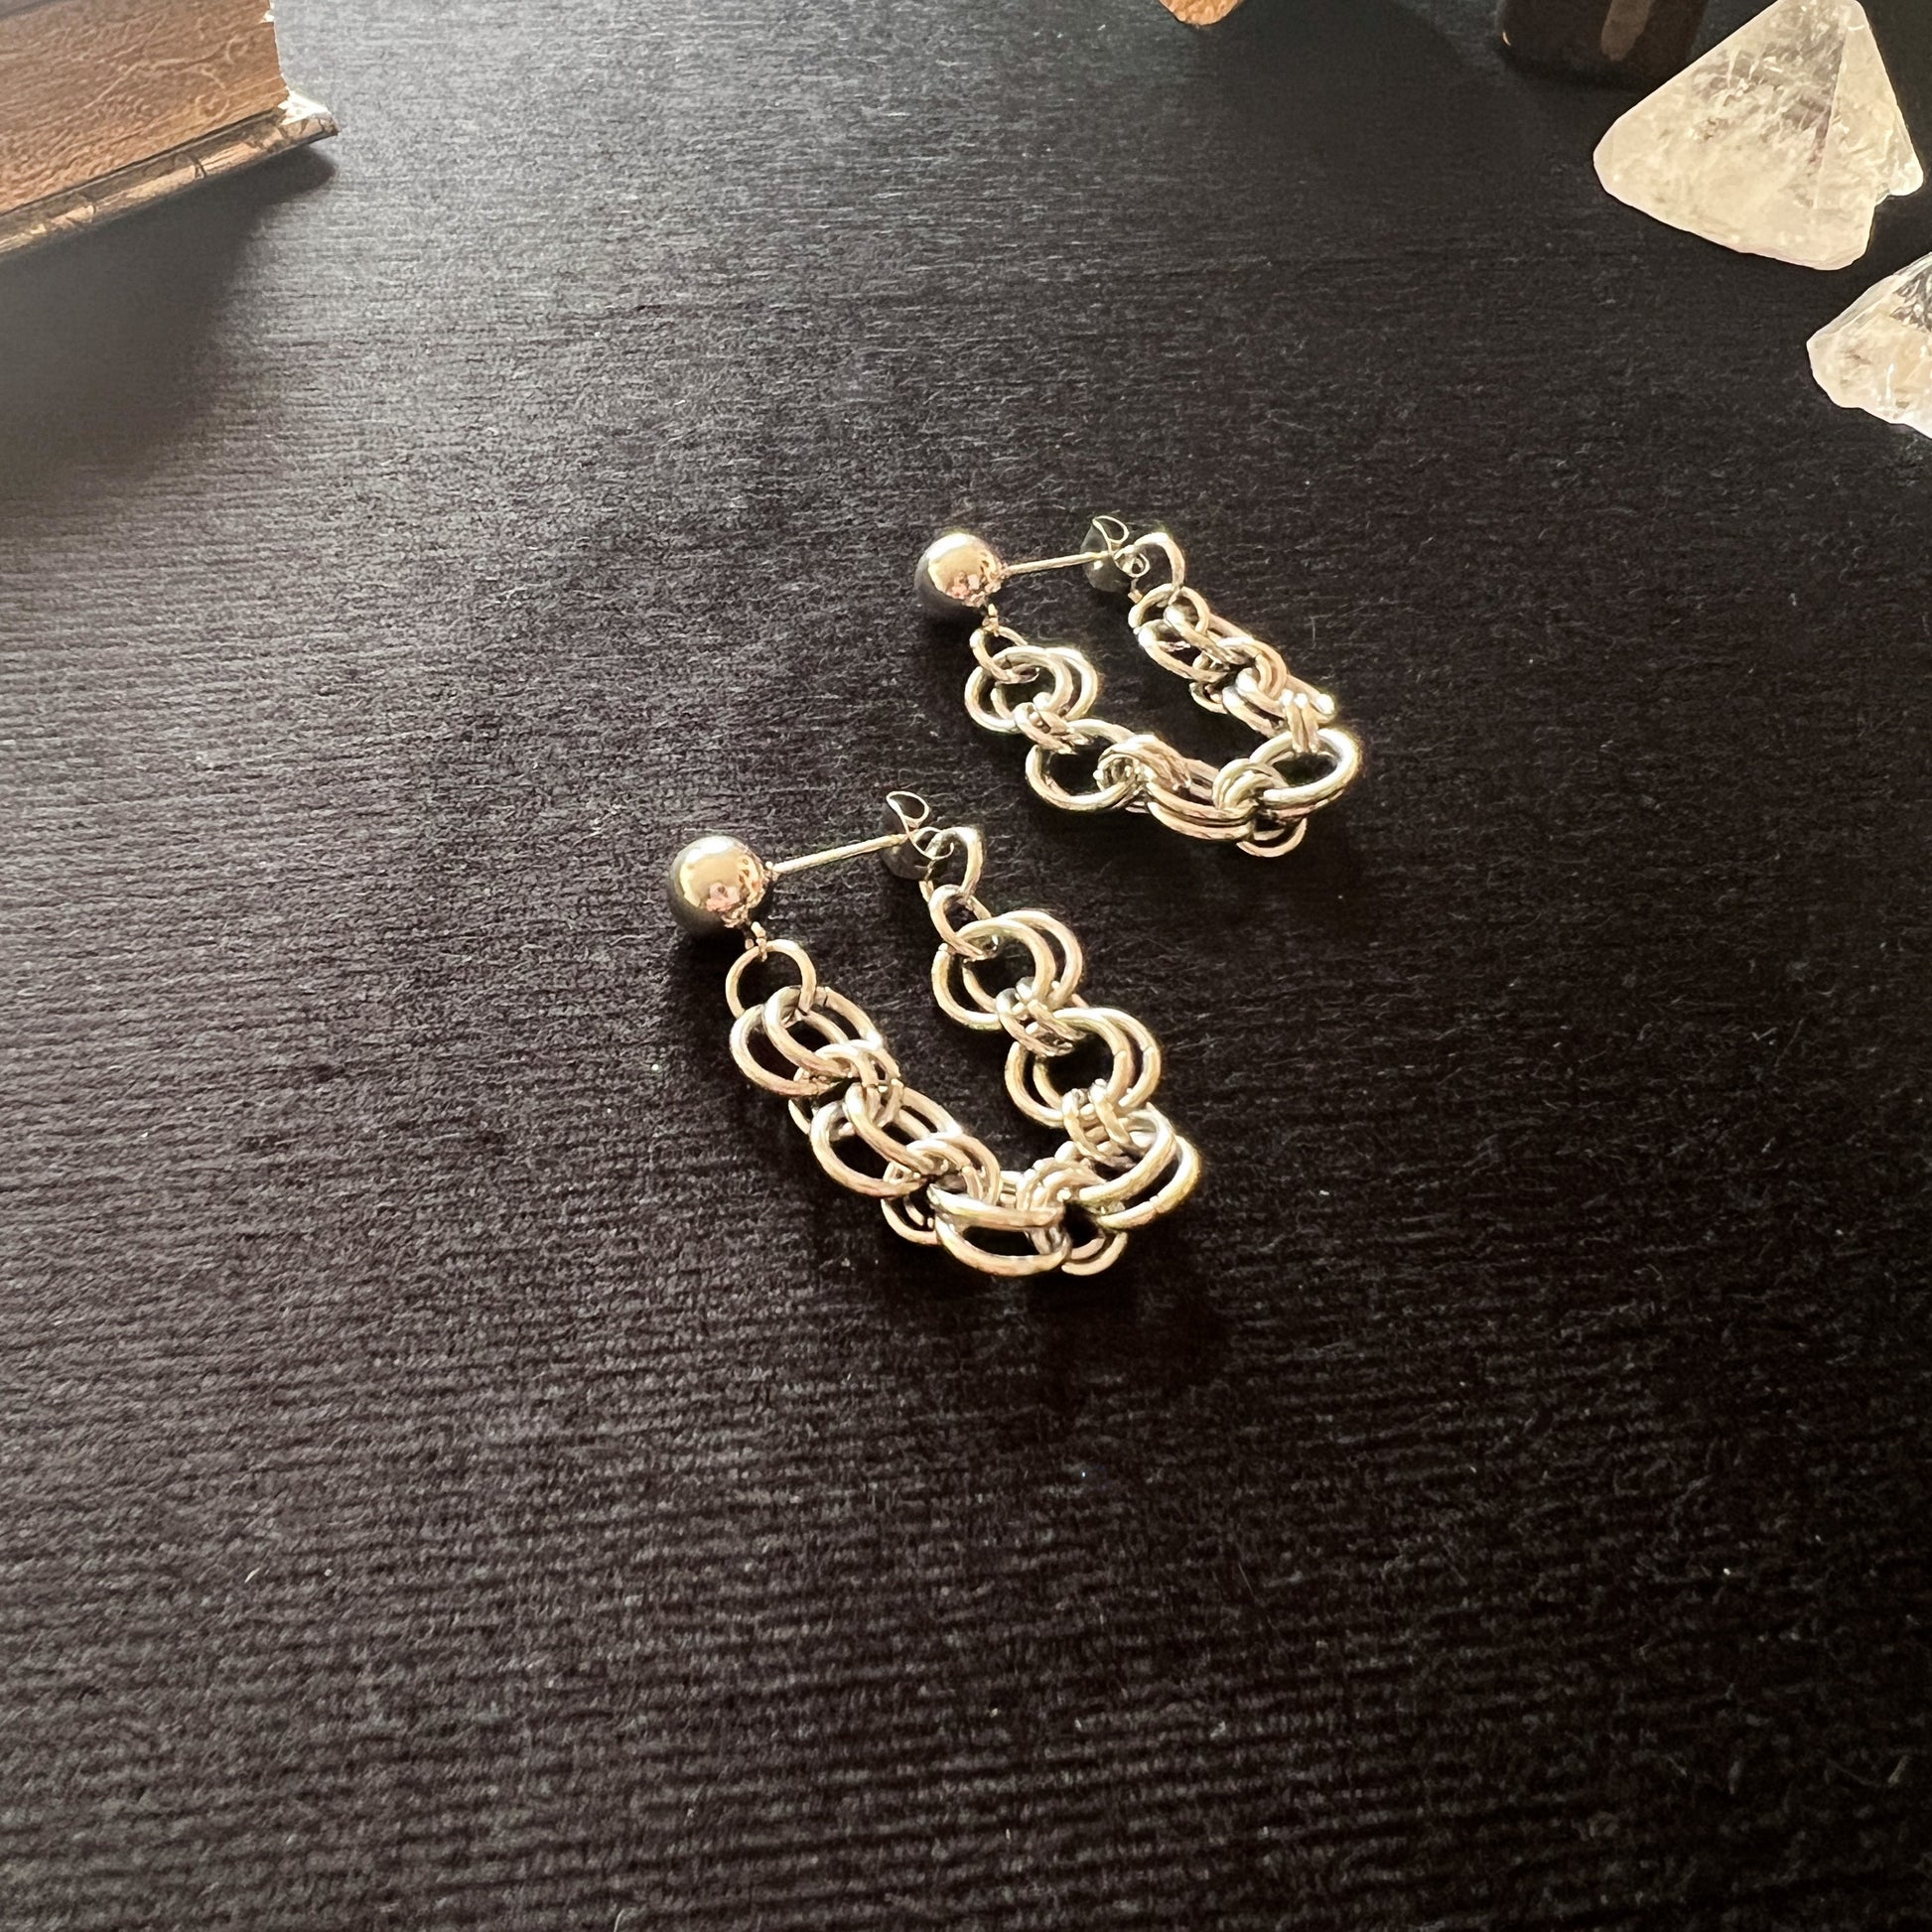 chainmail gothic earrings